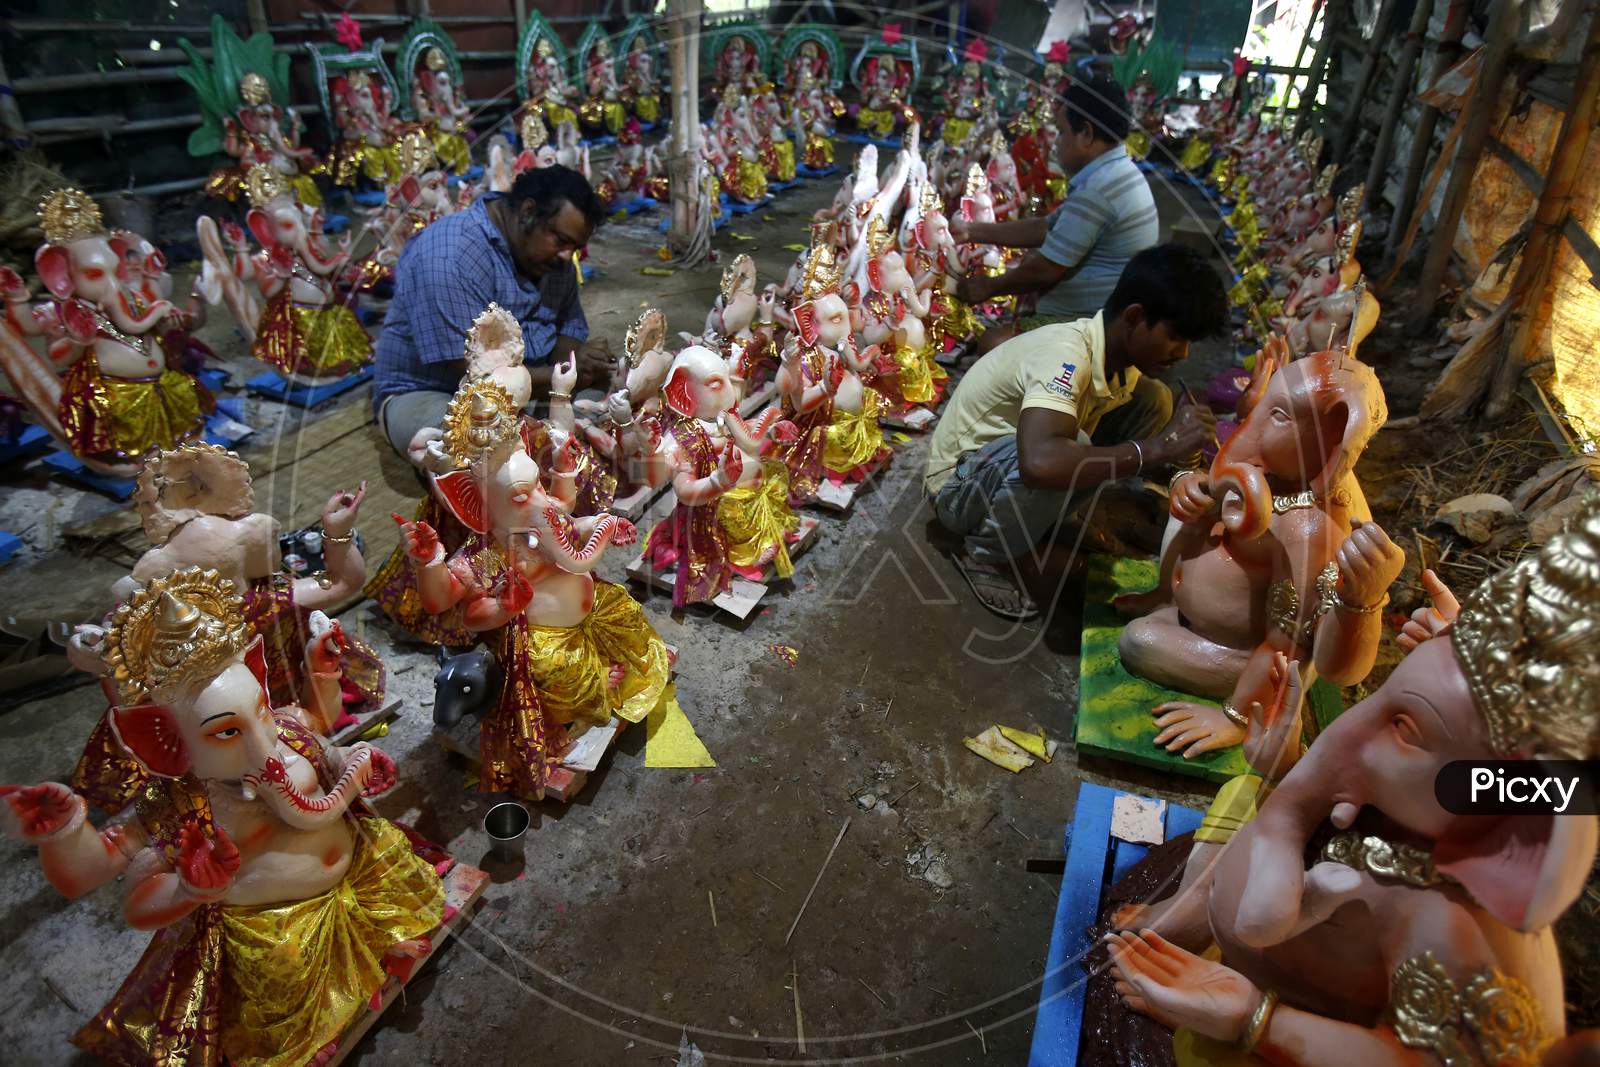 Artists giving final touch to idols of Lord Ganesha ahead of Ganesh Chaturthi festival in Chandigarh, August 20, 2020